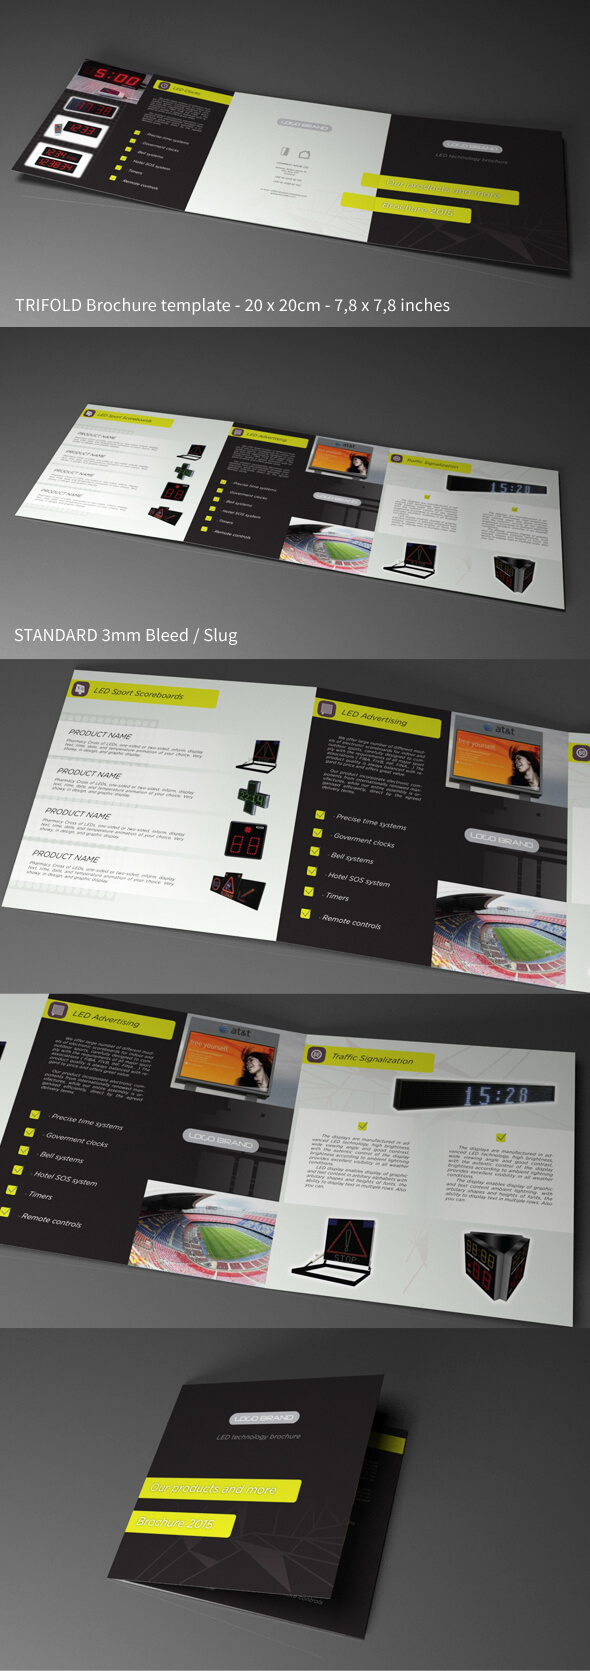 Free Indesign Template – Trifold Square Led Tech On Behance With Regard To Tri Fold Brochure Template Indesign Free Download